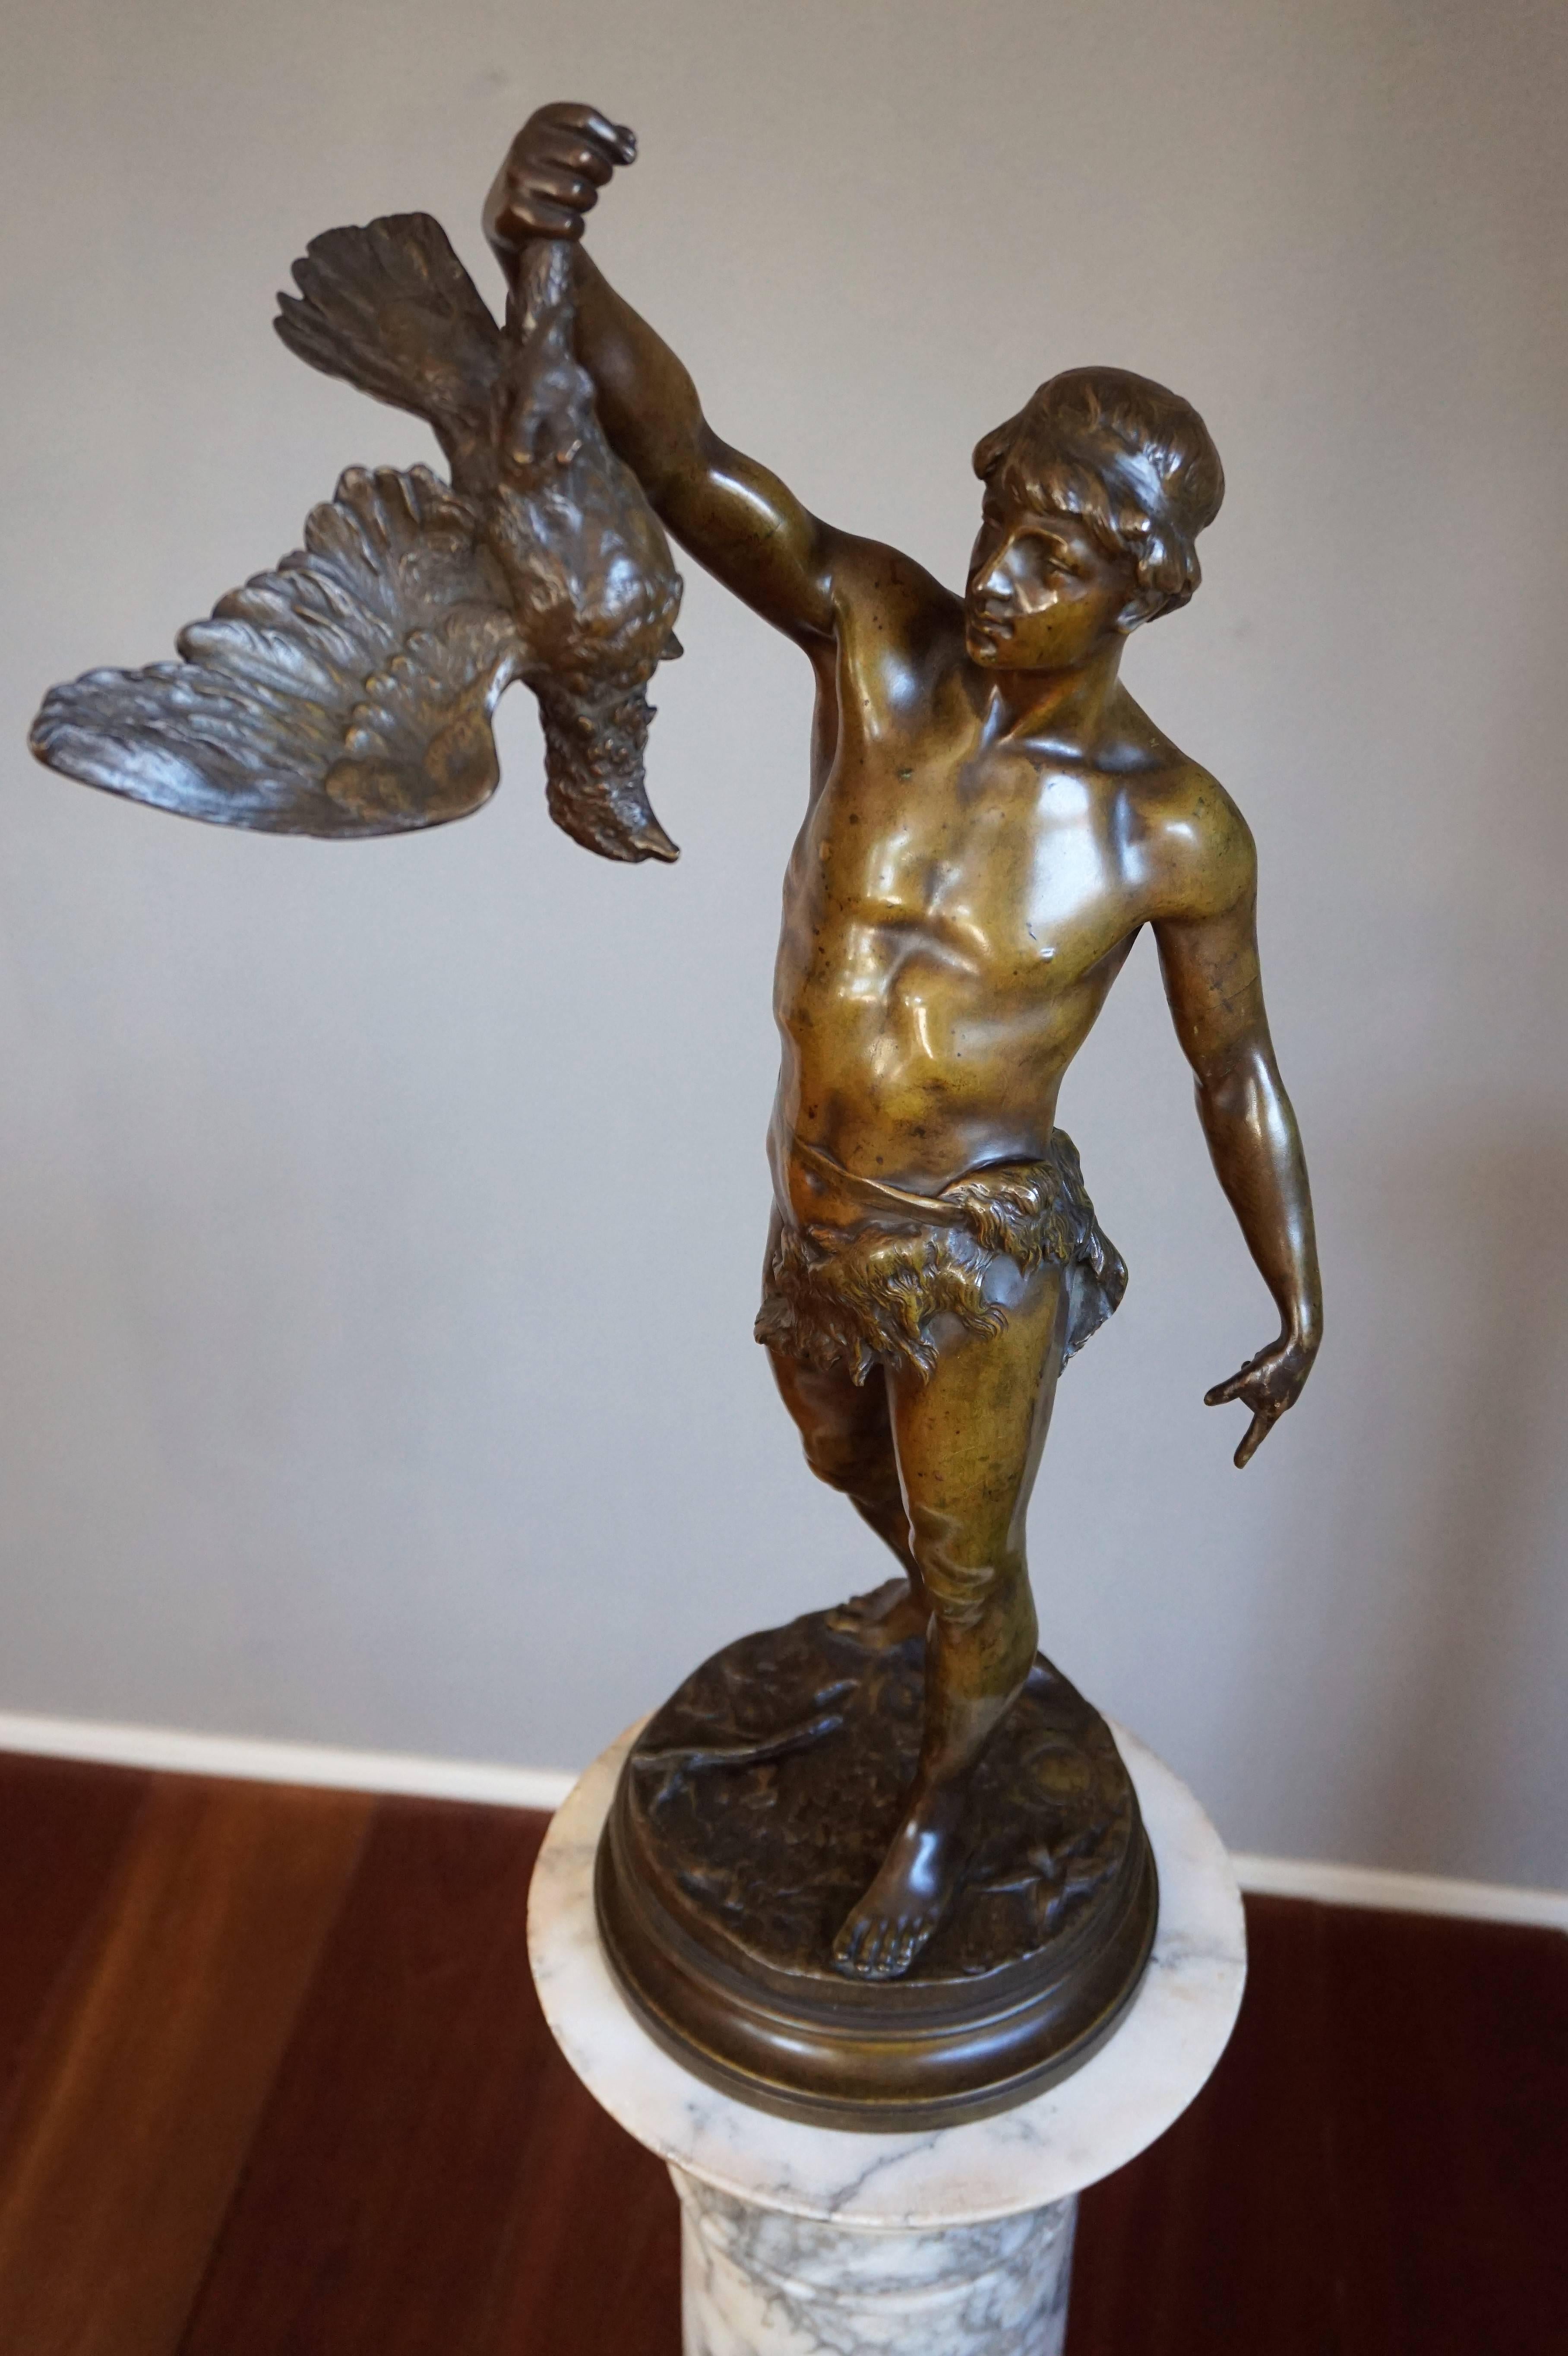 Rare and striking antique bronze sculpture by Georges Charles Coudray, (French, 1883-1932).

This almost nude, young male hunter holding a bird is by master sculptor Georges Coudray and it does not take a trained eye to see the quality in the